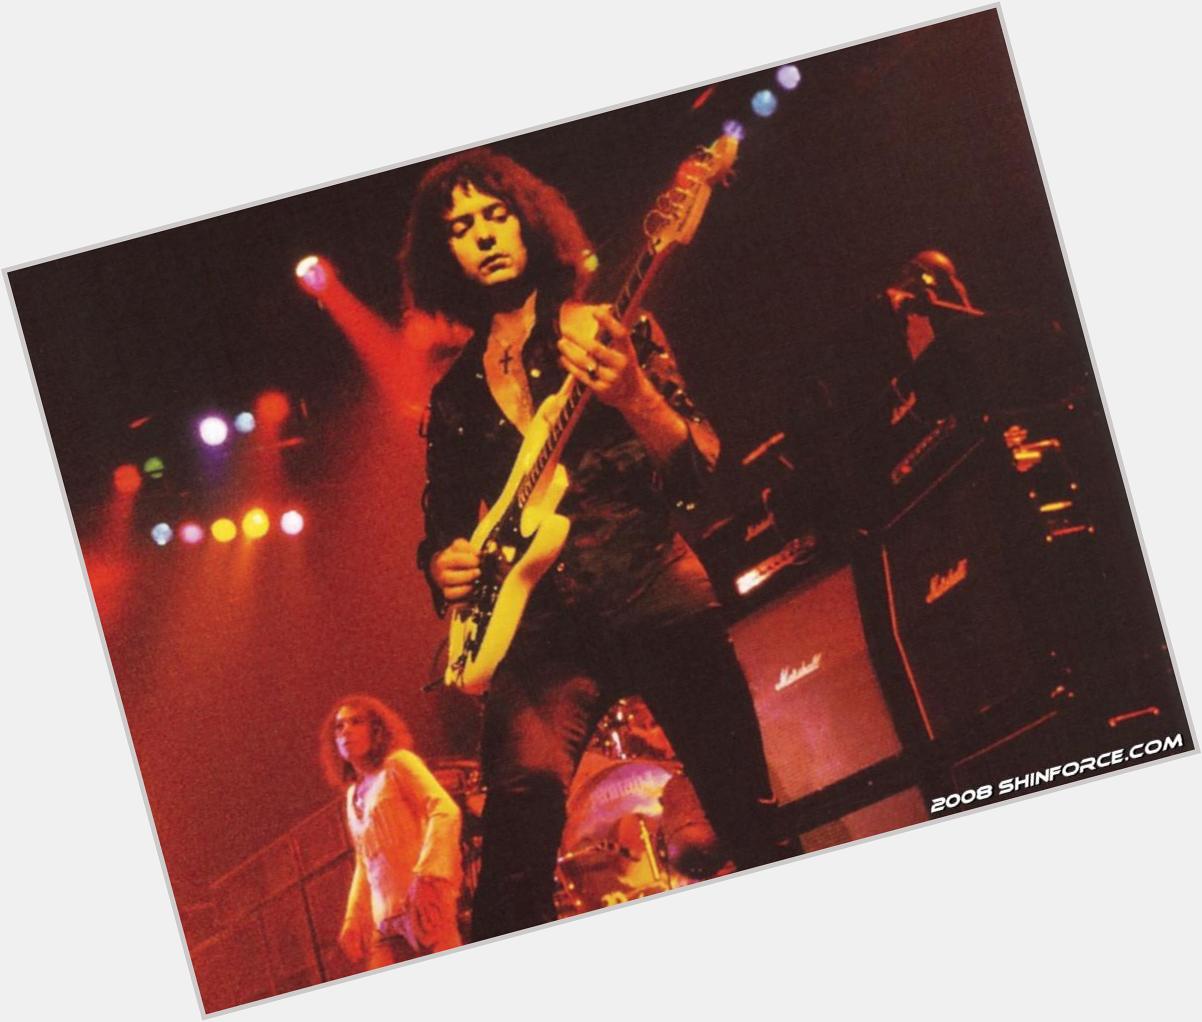 Happy 70th Birthday to one of my guitar heroes, Ritchie Blackmore. 